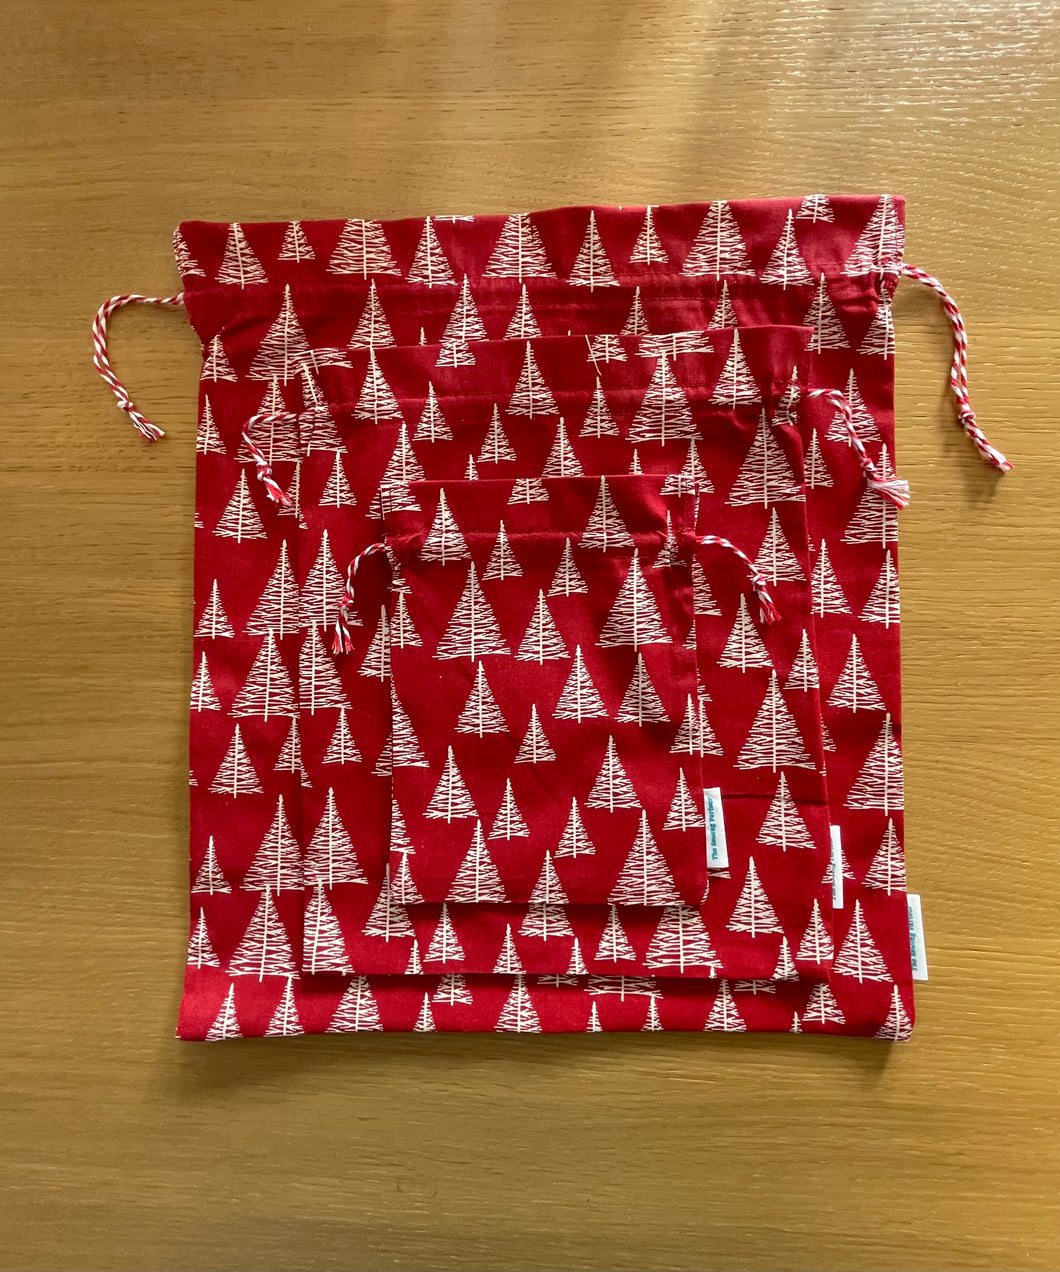 FABRIC GIFT BAGS